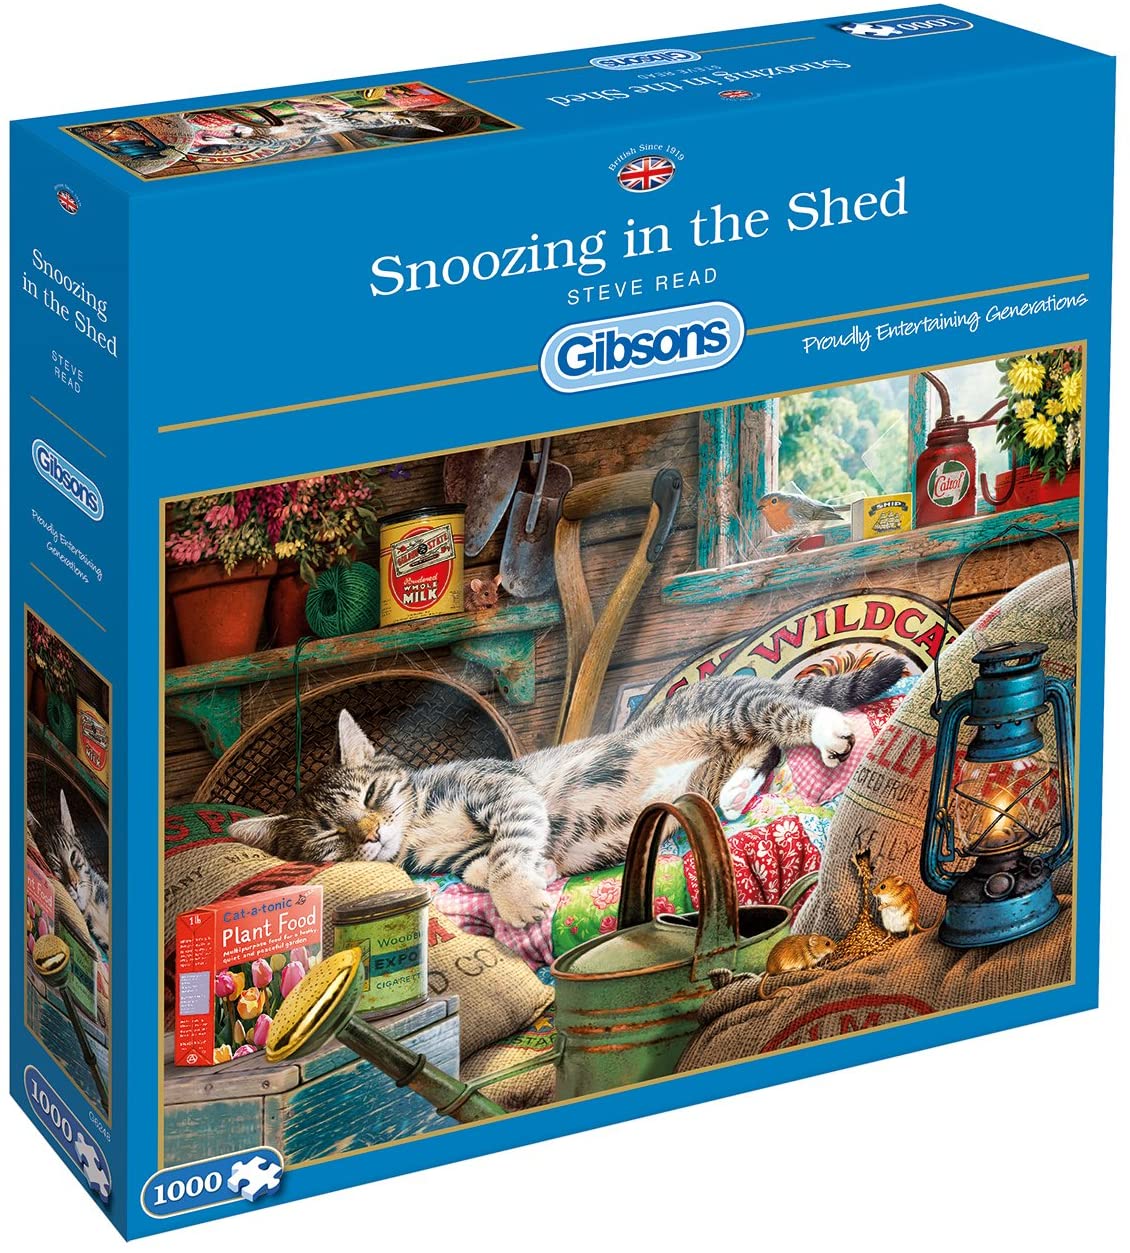 SNOOZING IN THE SHED 1000pc - Gibsons